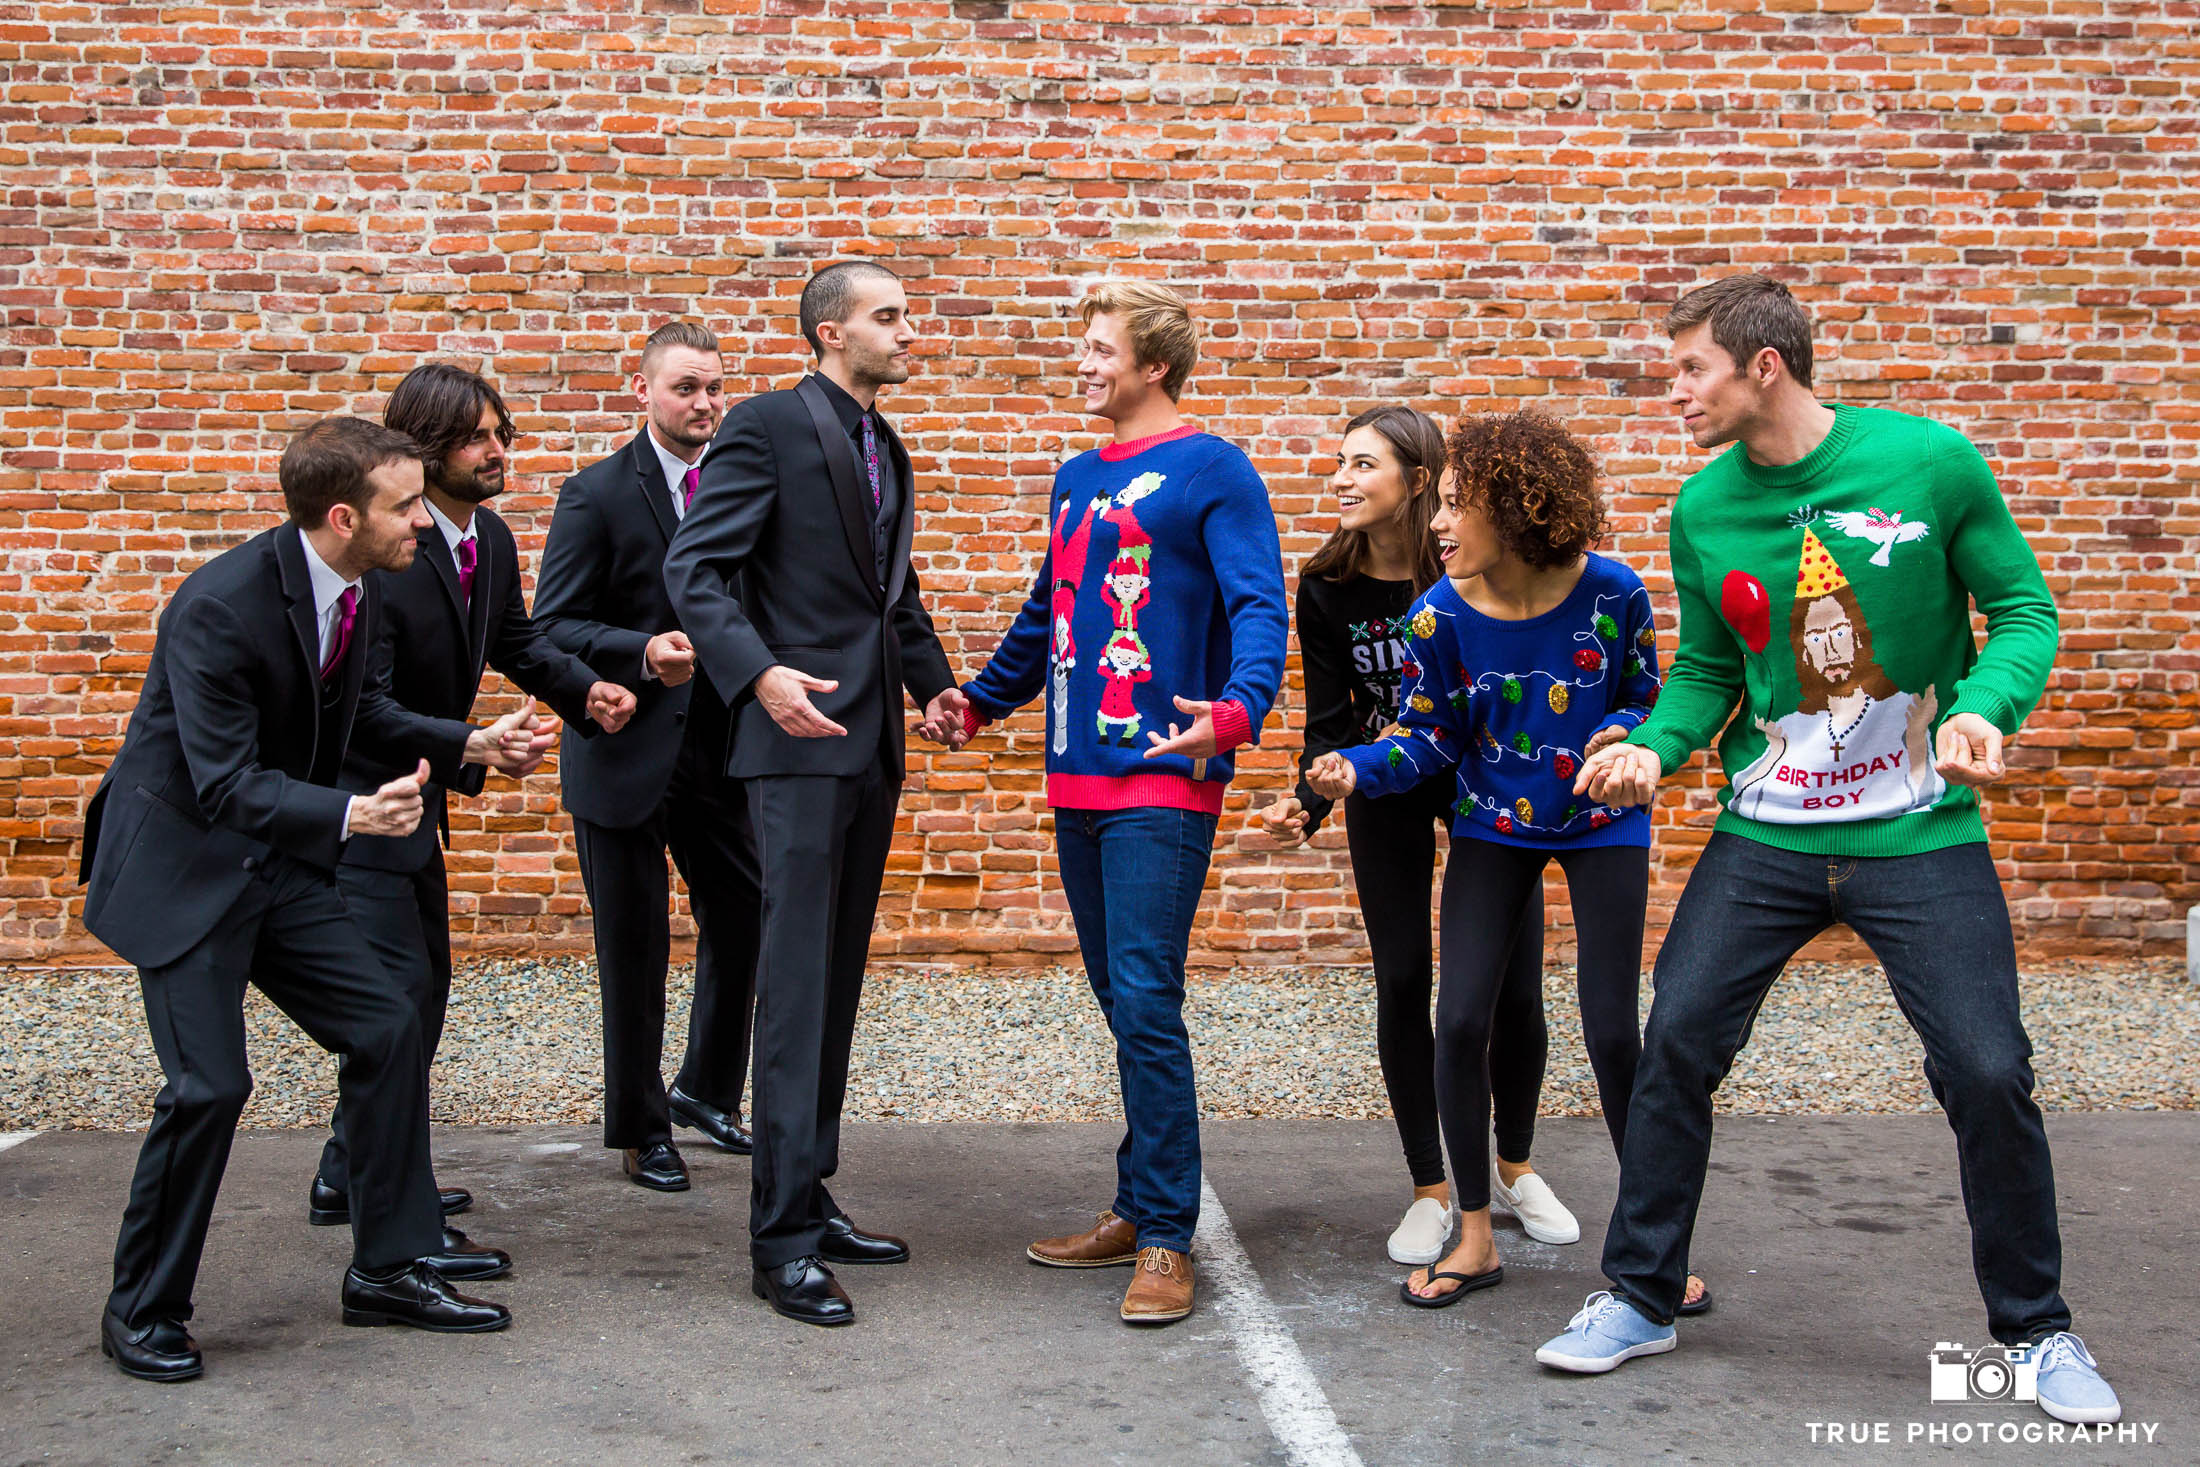 Groom and groomsmen snapping fingers in front of brick wall with Tipsy Elves in ugly christmas sweaters